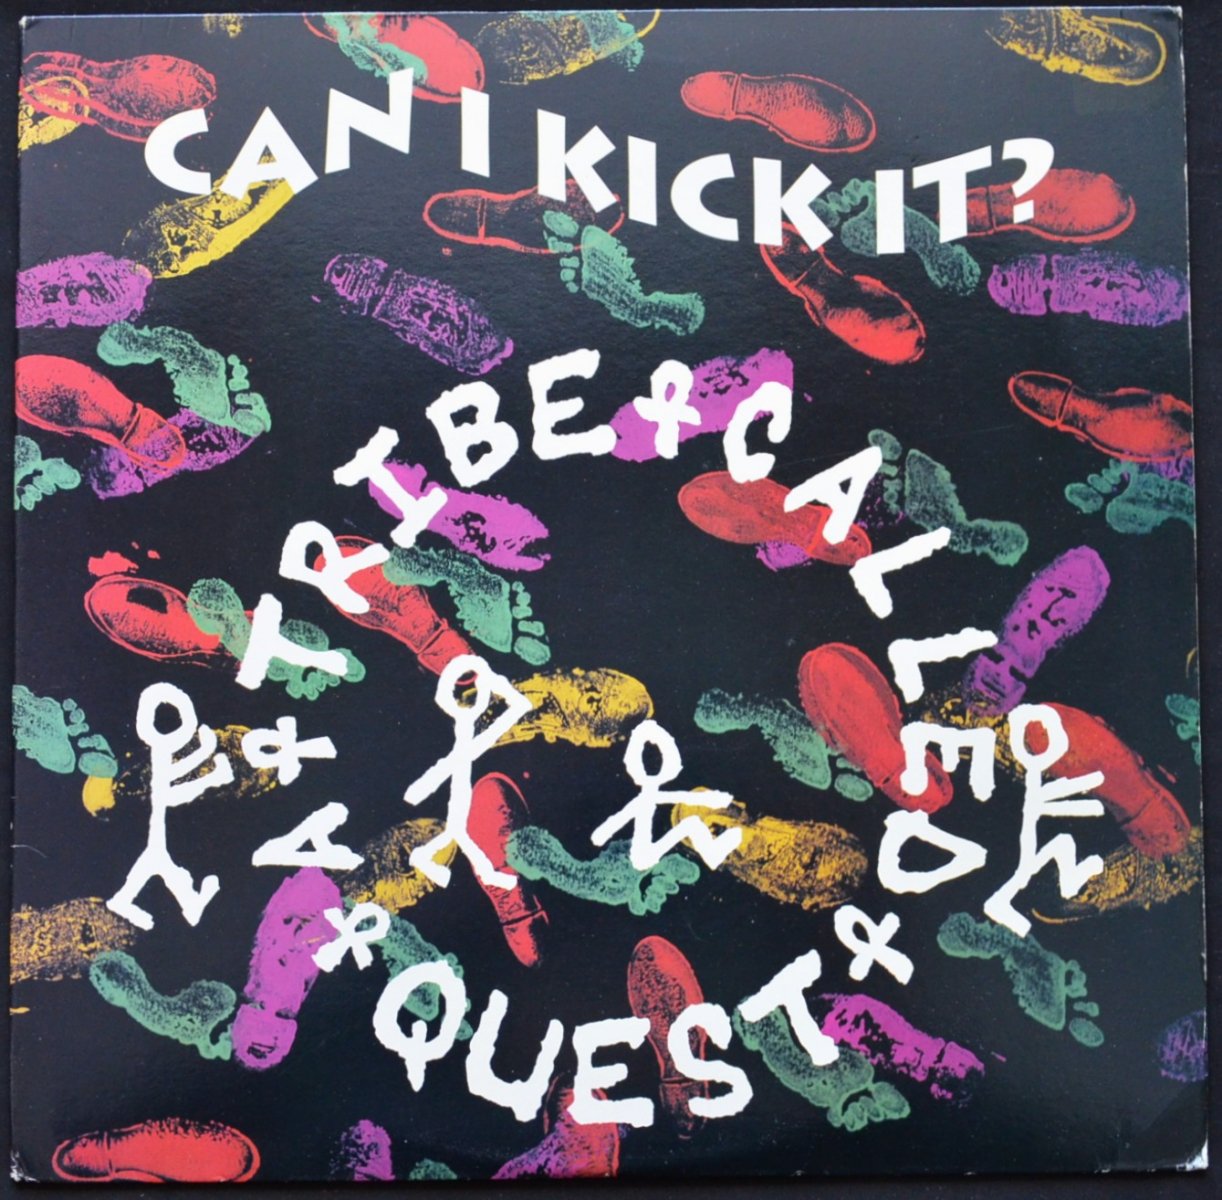 A TRIBE CALLED QUEST ‎/ CAN I KICK IT? / IF THE PAPES COME (12